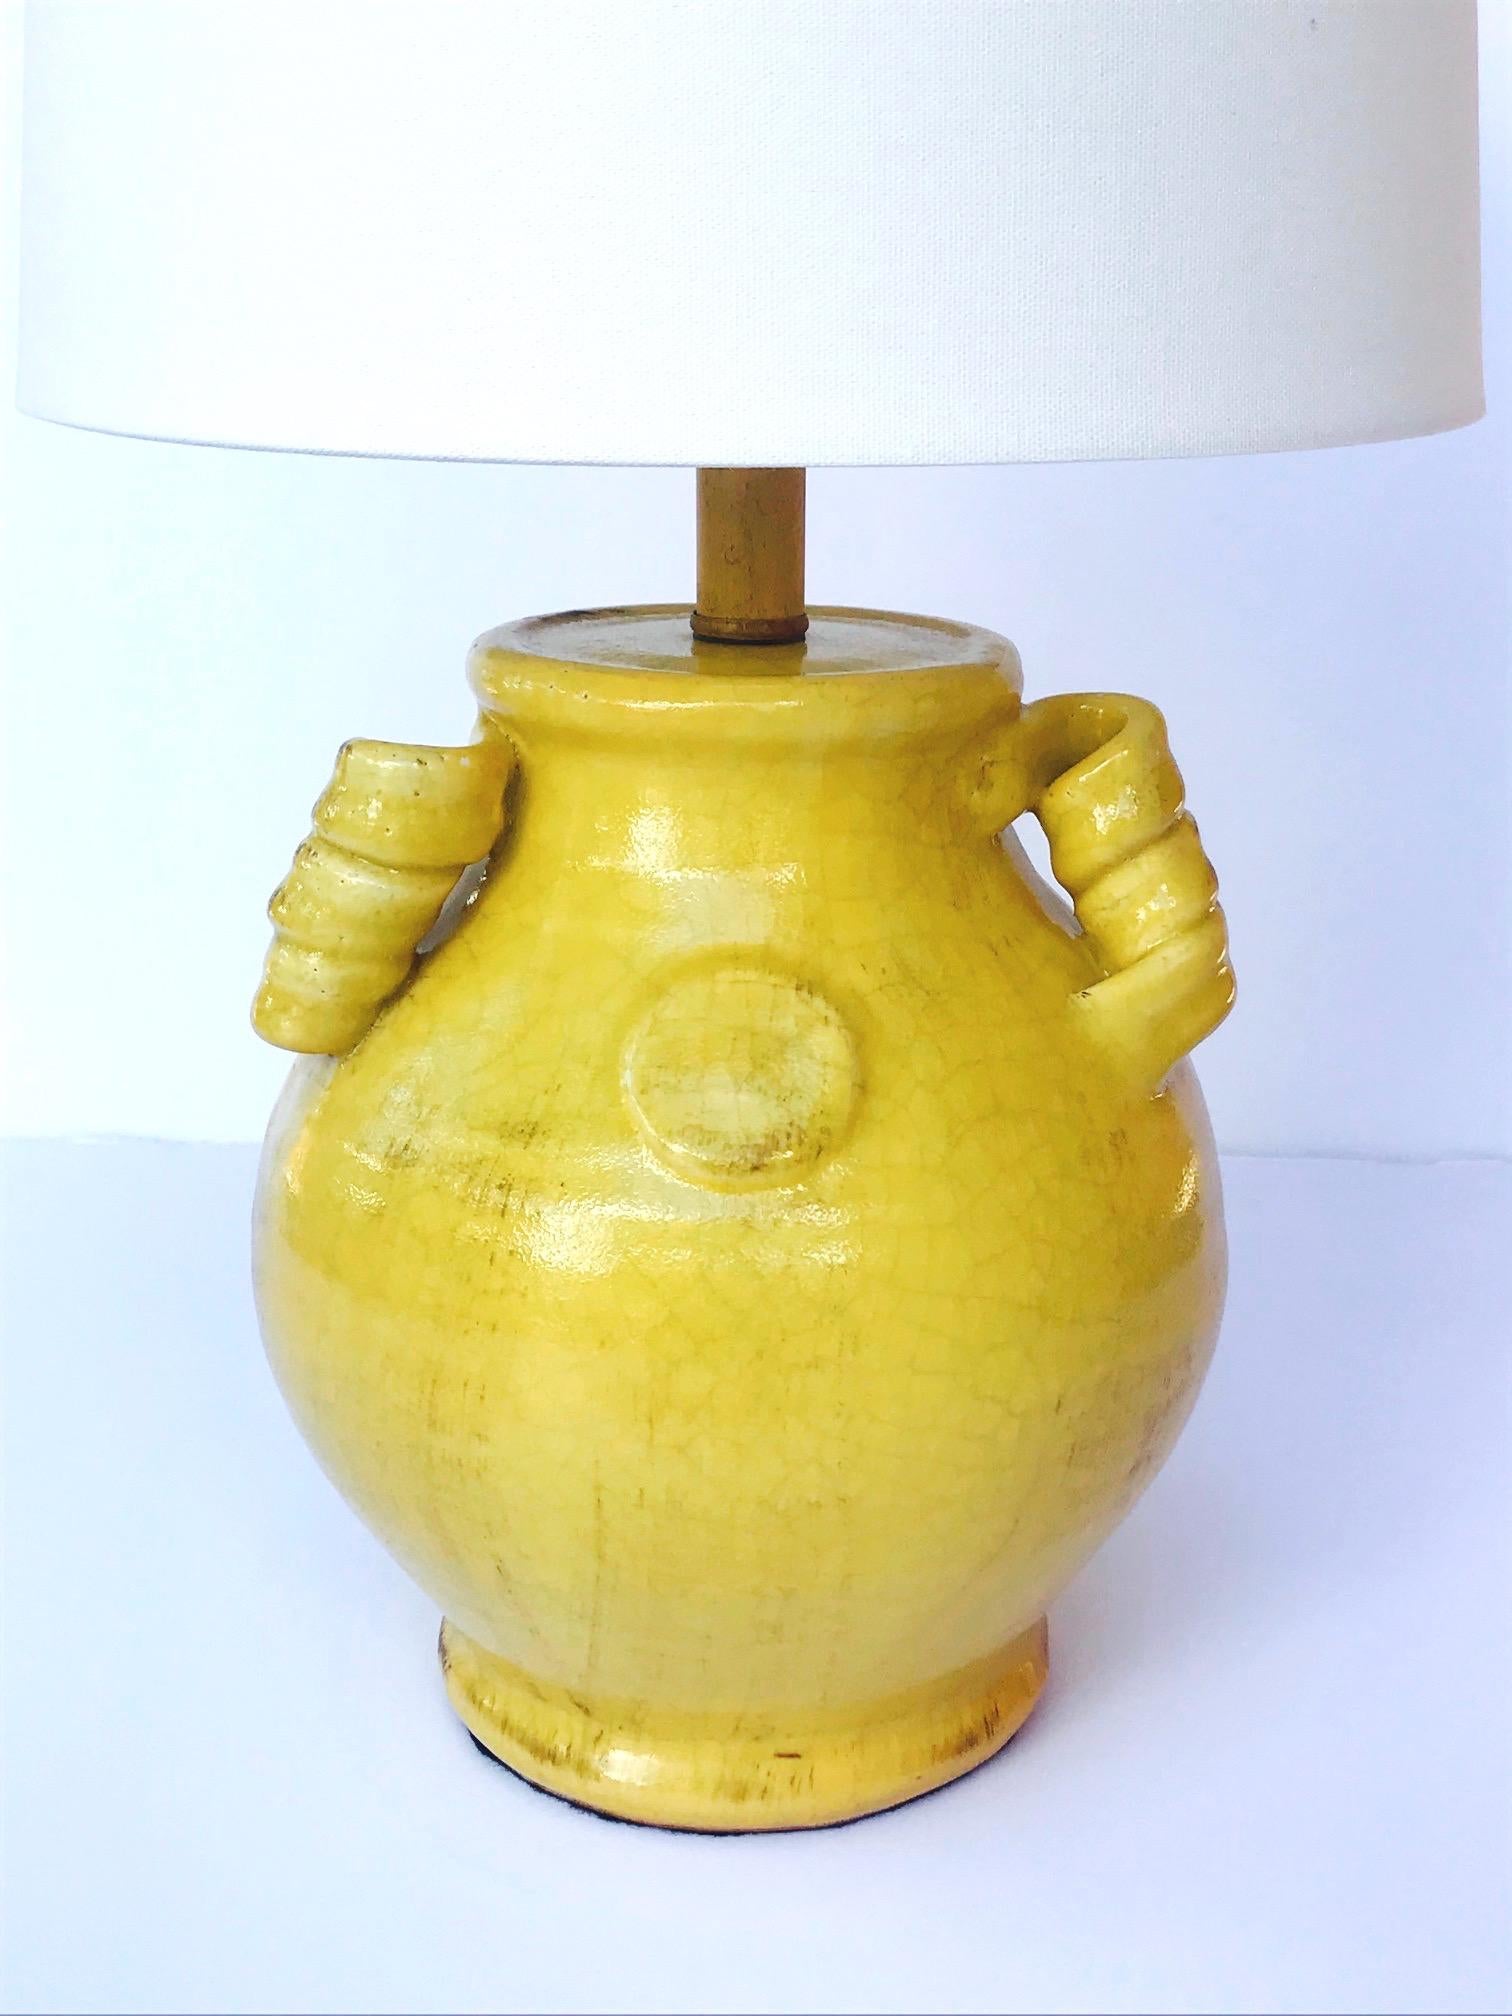 Pair of Vintage Chinese Pottery Lamps with Antique Yellow Glaze, c. 1980's 1